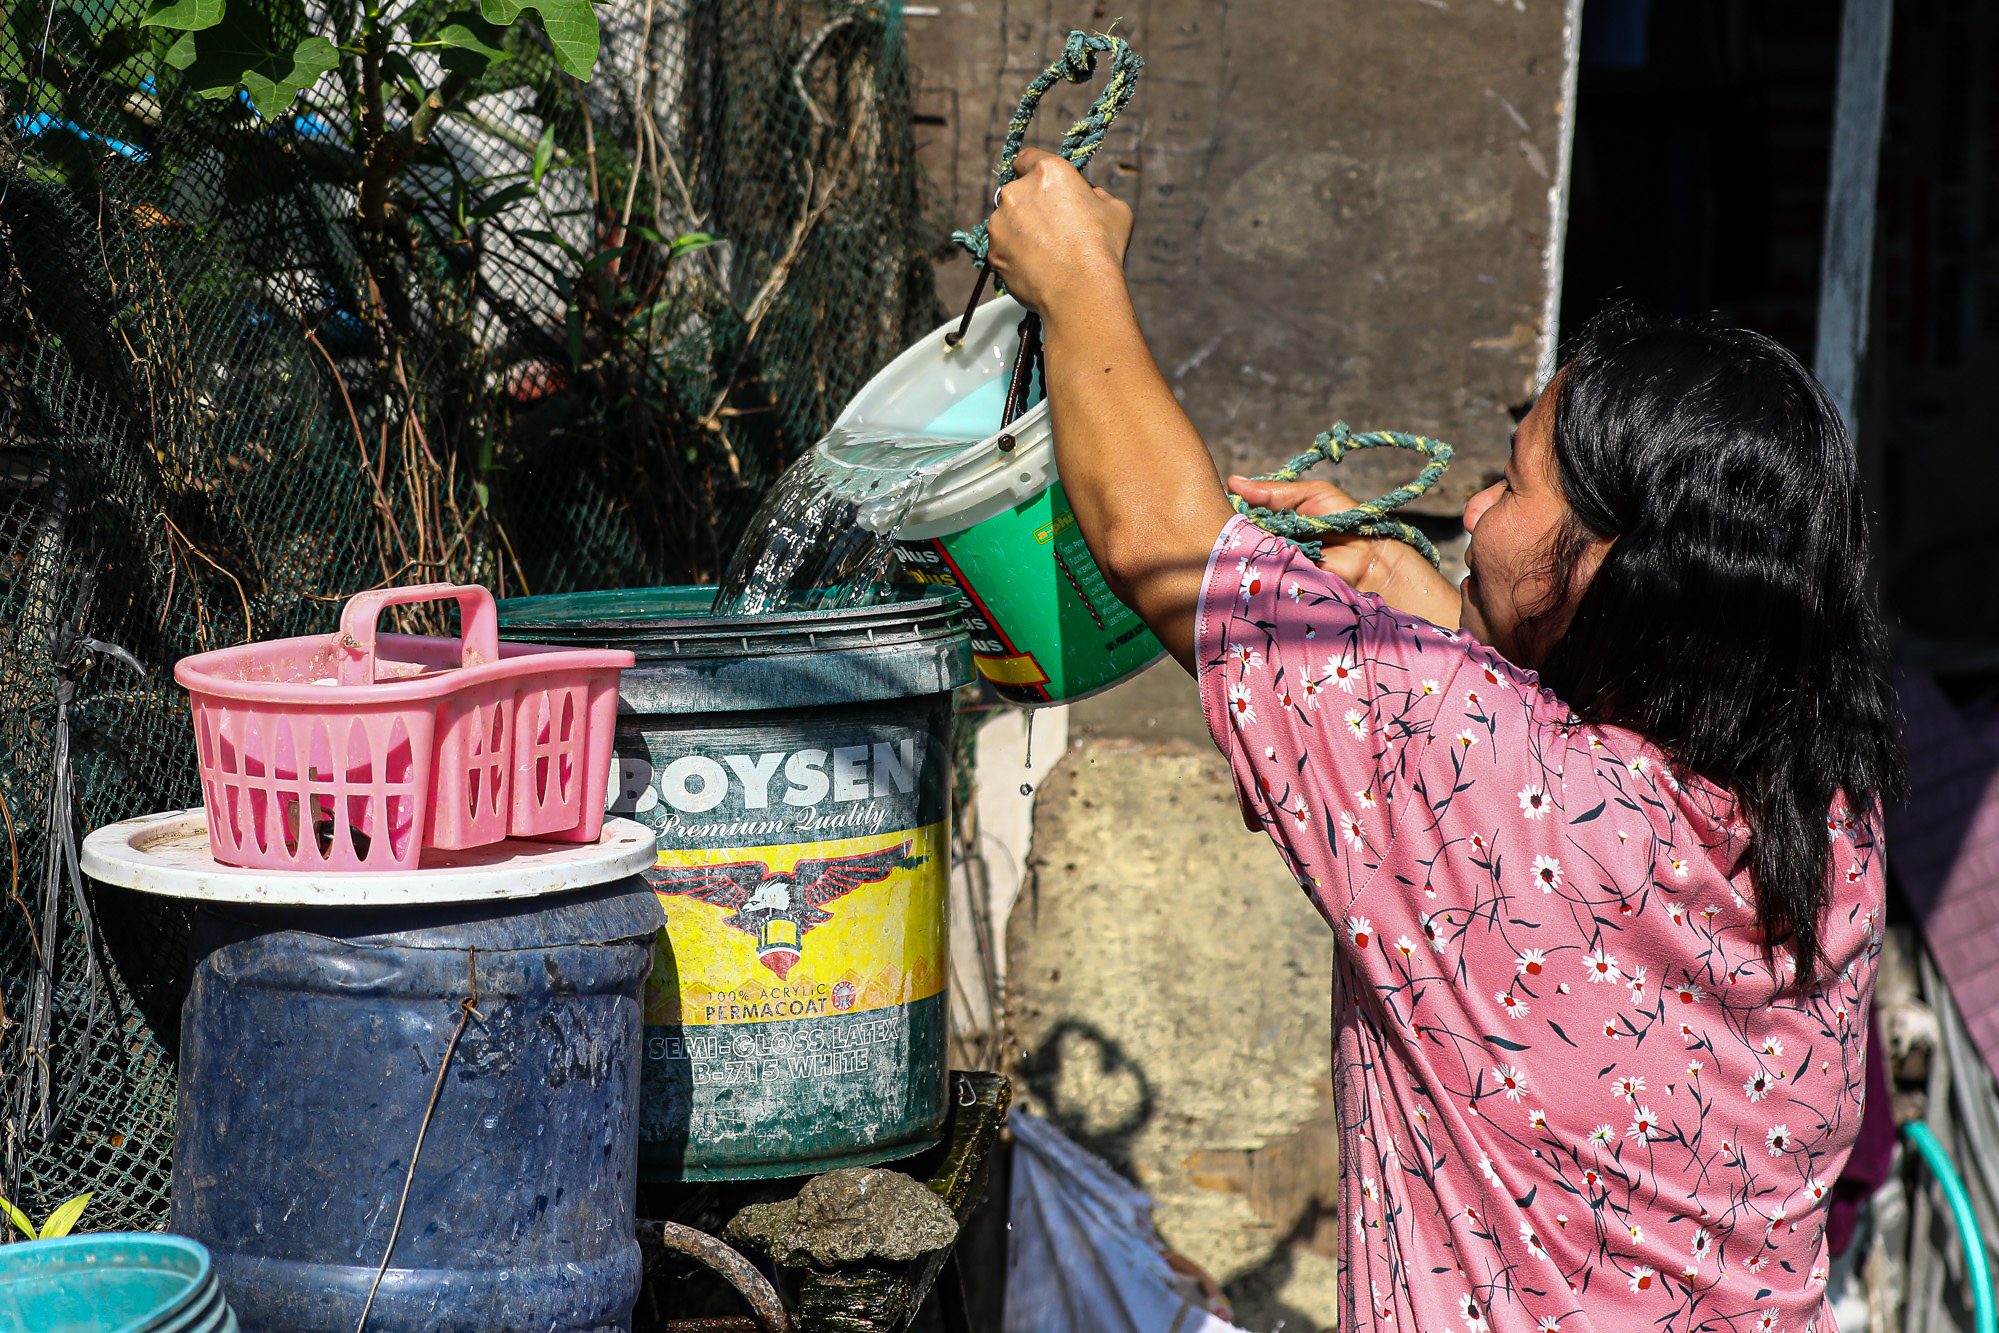 Thousands of households to benefit if gov’t offices conserve water – DENR official